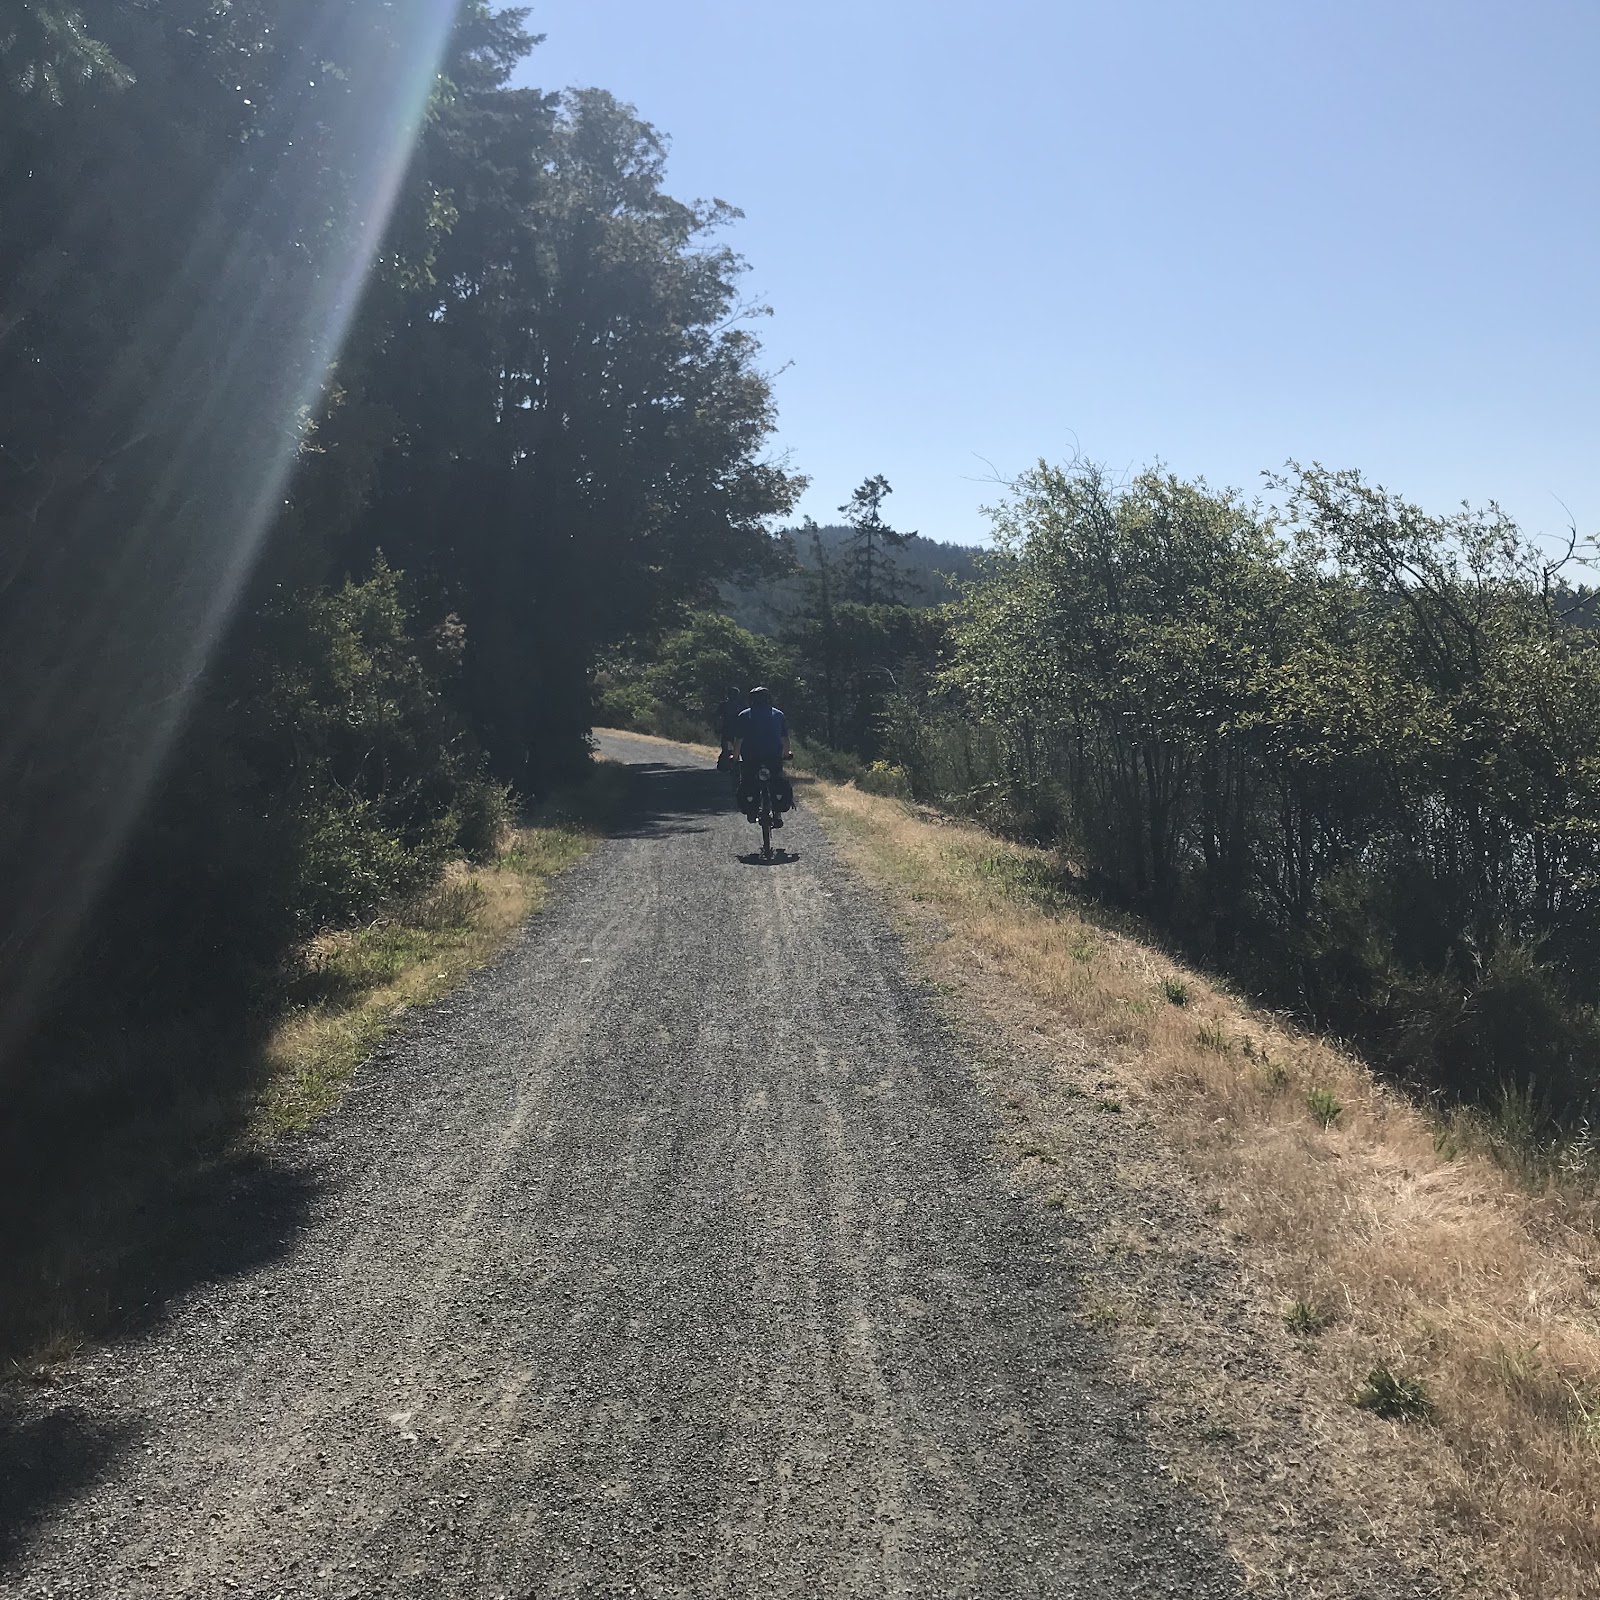 Riding the galloping goose trail